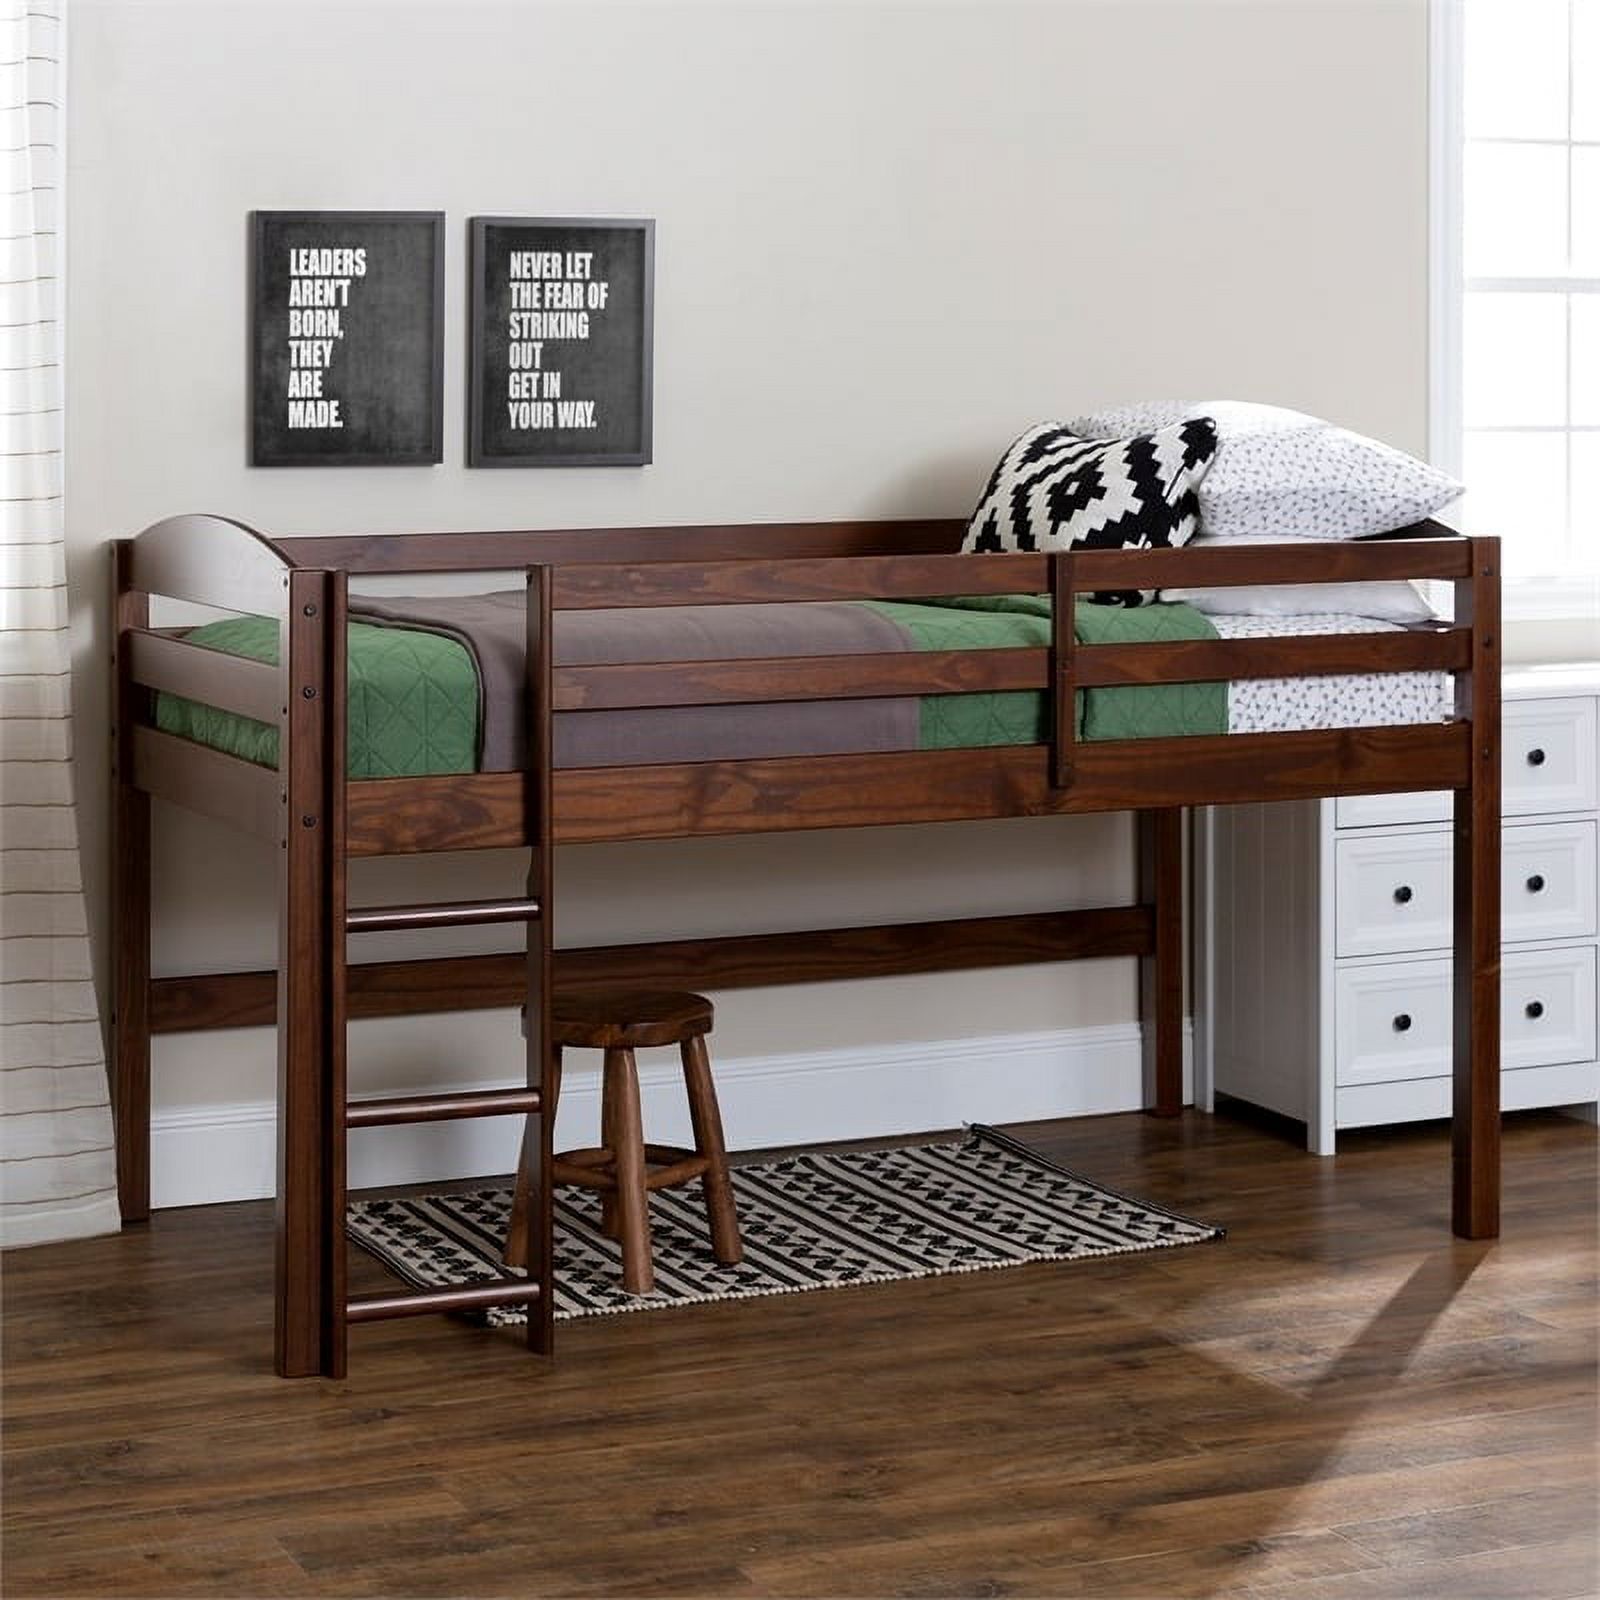 Pemberly Row Transitional Solid Wood Twin Low Loft Bed in Walnut Brown - image 2 of 10